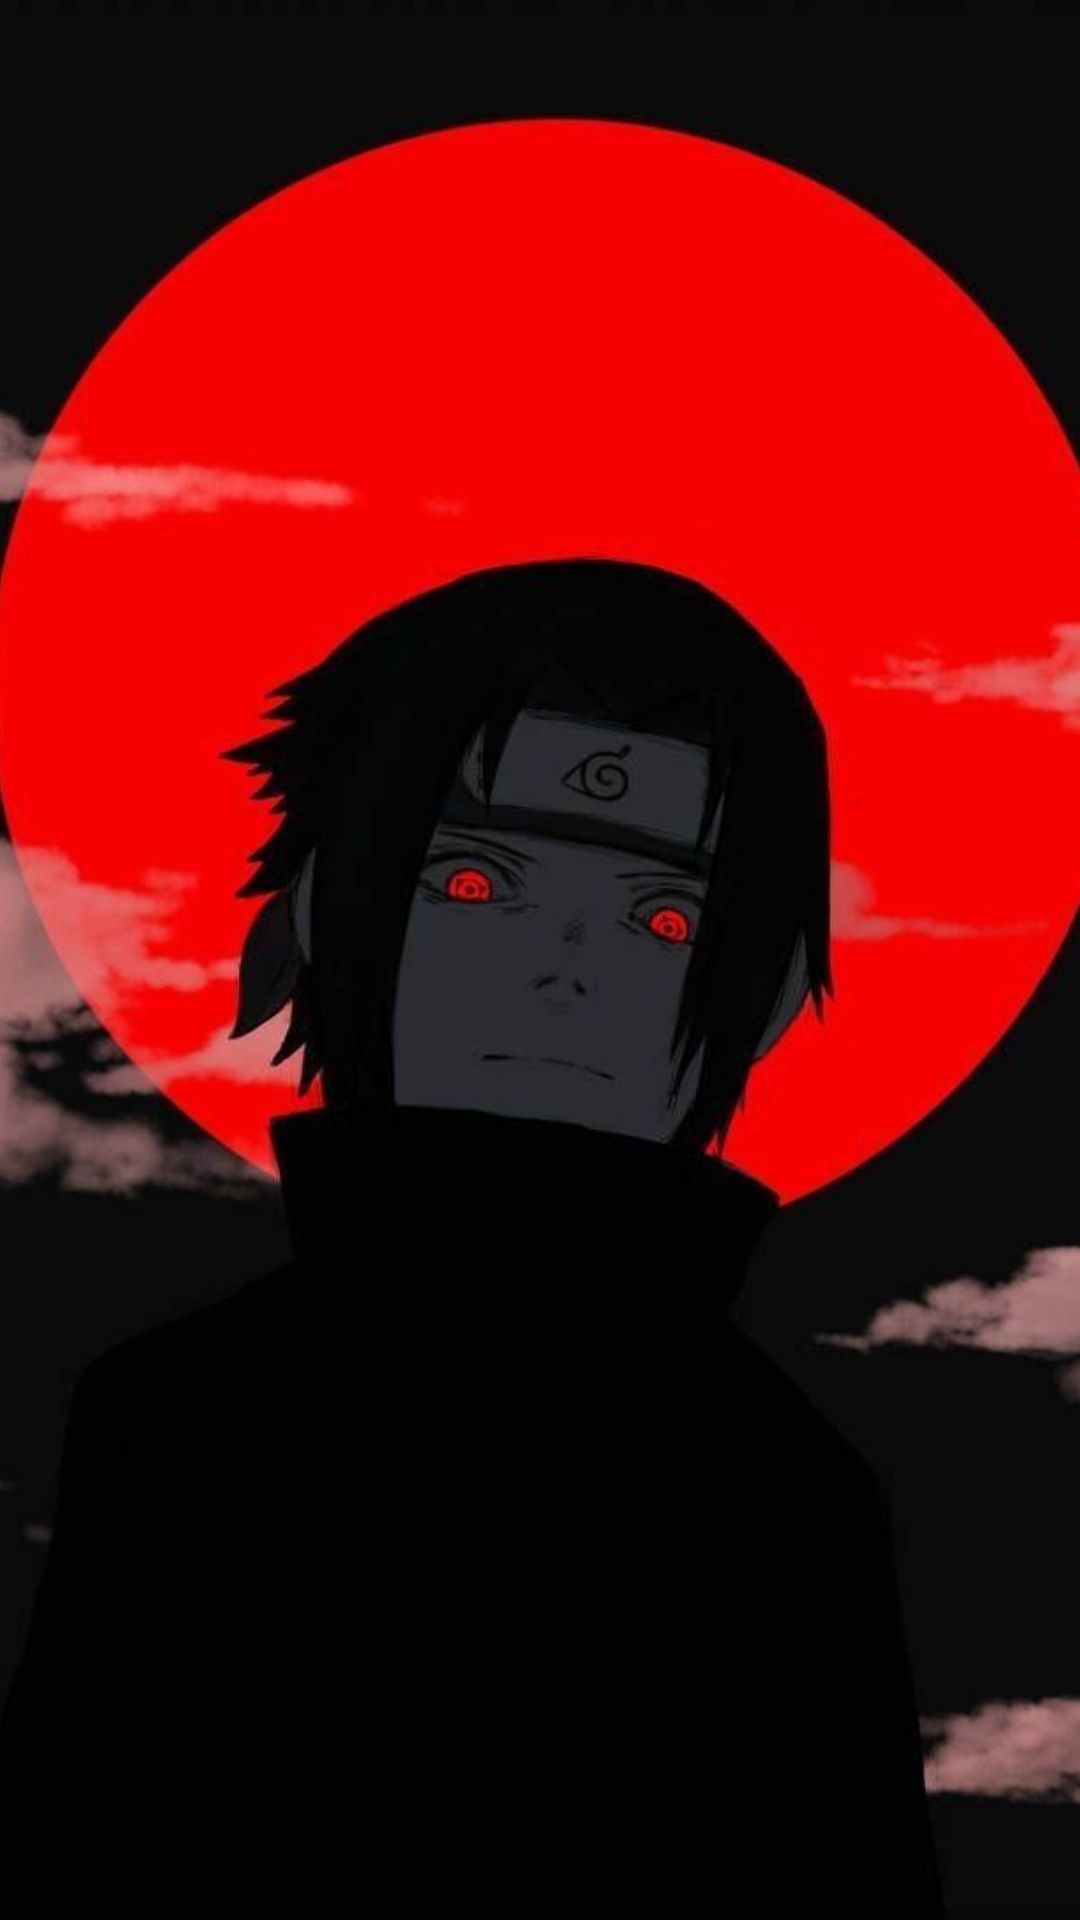 Itachi Uchiha Wallpaper iPhone with high-resolution 1080x1920 pixel. You can use this wallpaper for your iPhone 5, 6, 7, 8, X, XS, XR backgrounds, Mobile Screensaver, or iPad Lock Screen - Sasuke Uchiha